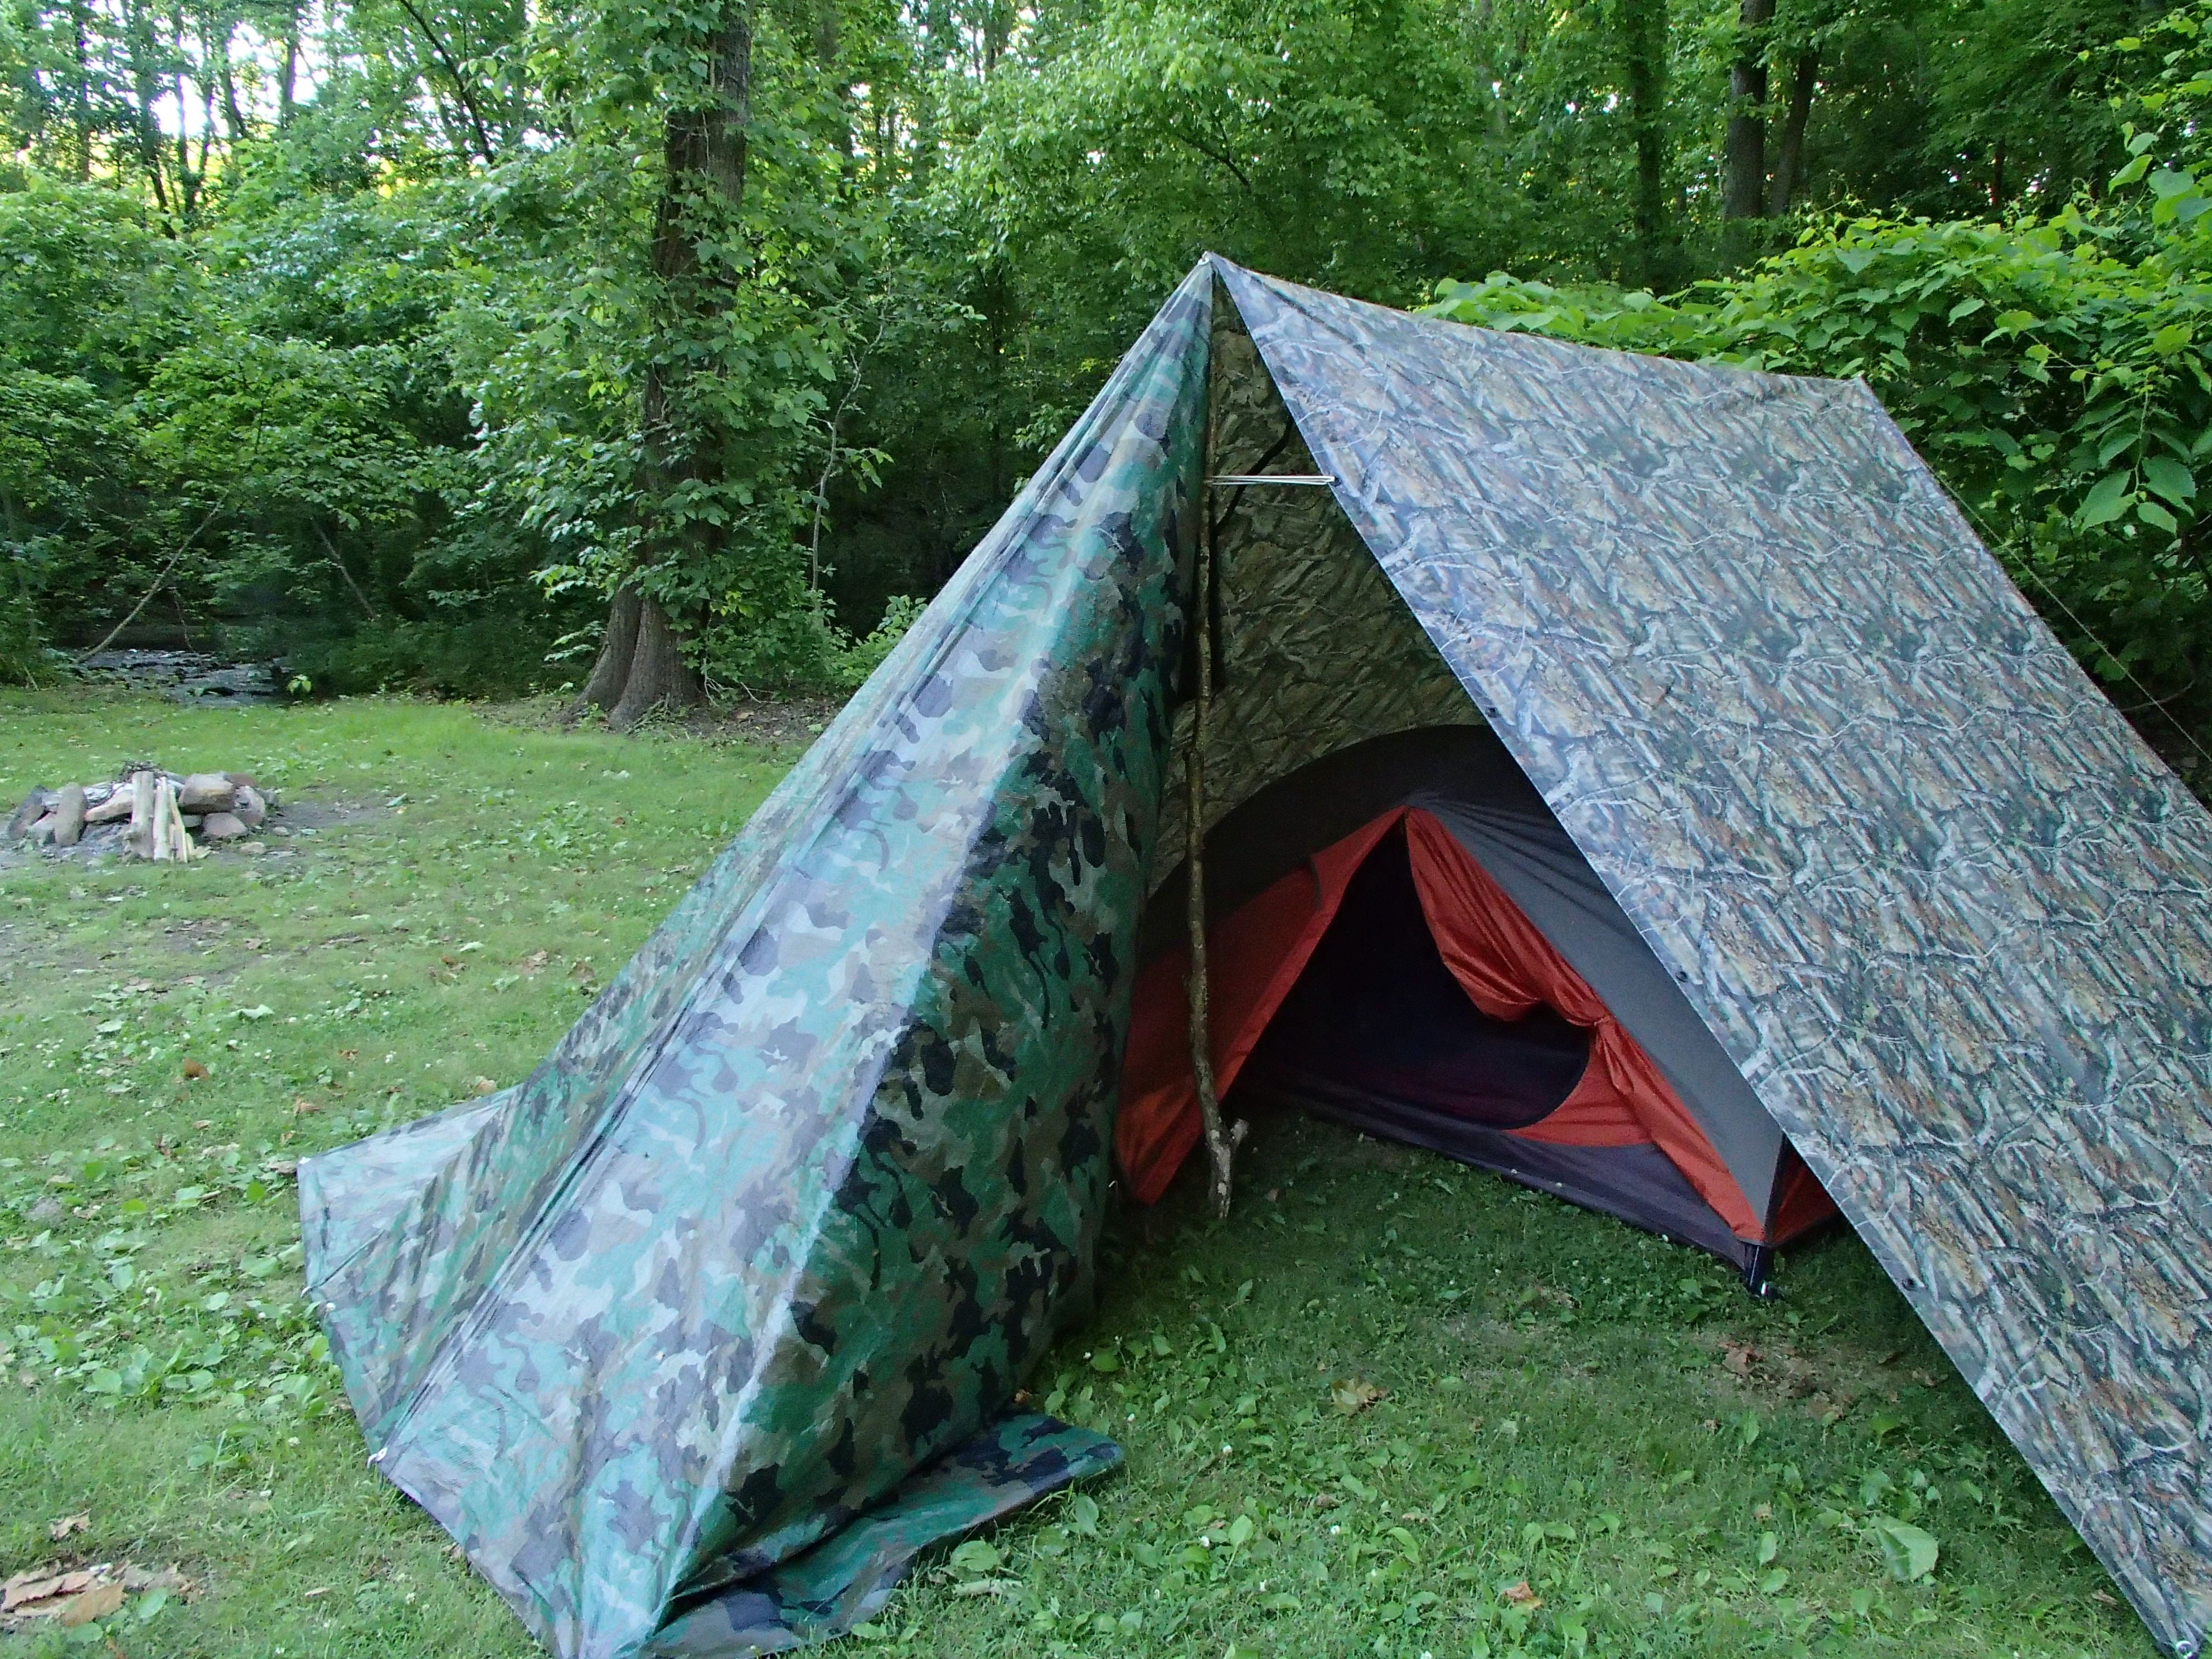 This is the only way to stay dry camping in the Virginia's...the fine art of tarping.